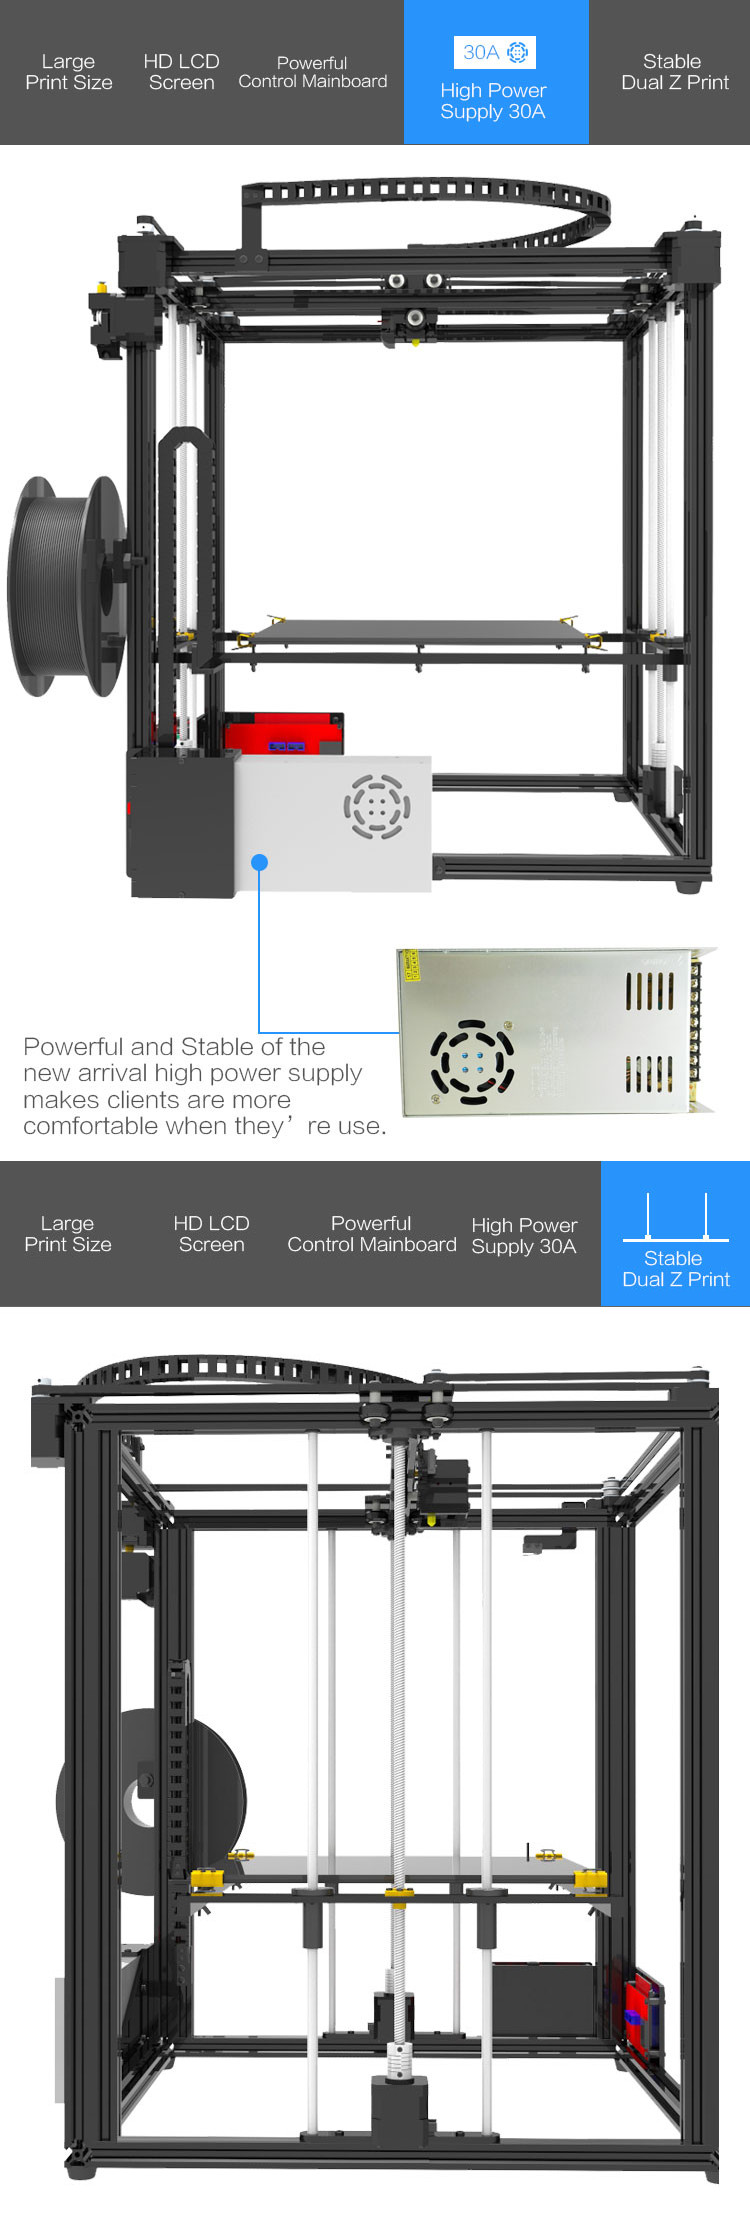 TRONXY® X5S-400 DIY Aluminum 3D Printer Kit 400*400*400mm Large Printing Size With Dual Z-axis Rod/HD LCD Screen/Double Fan 1.75mm 0.4mm Nozzle 12